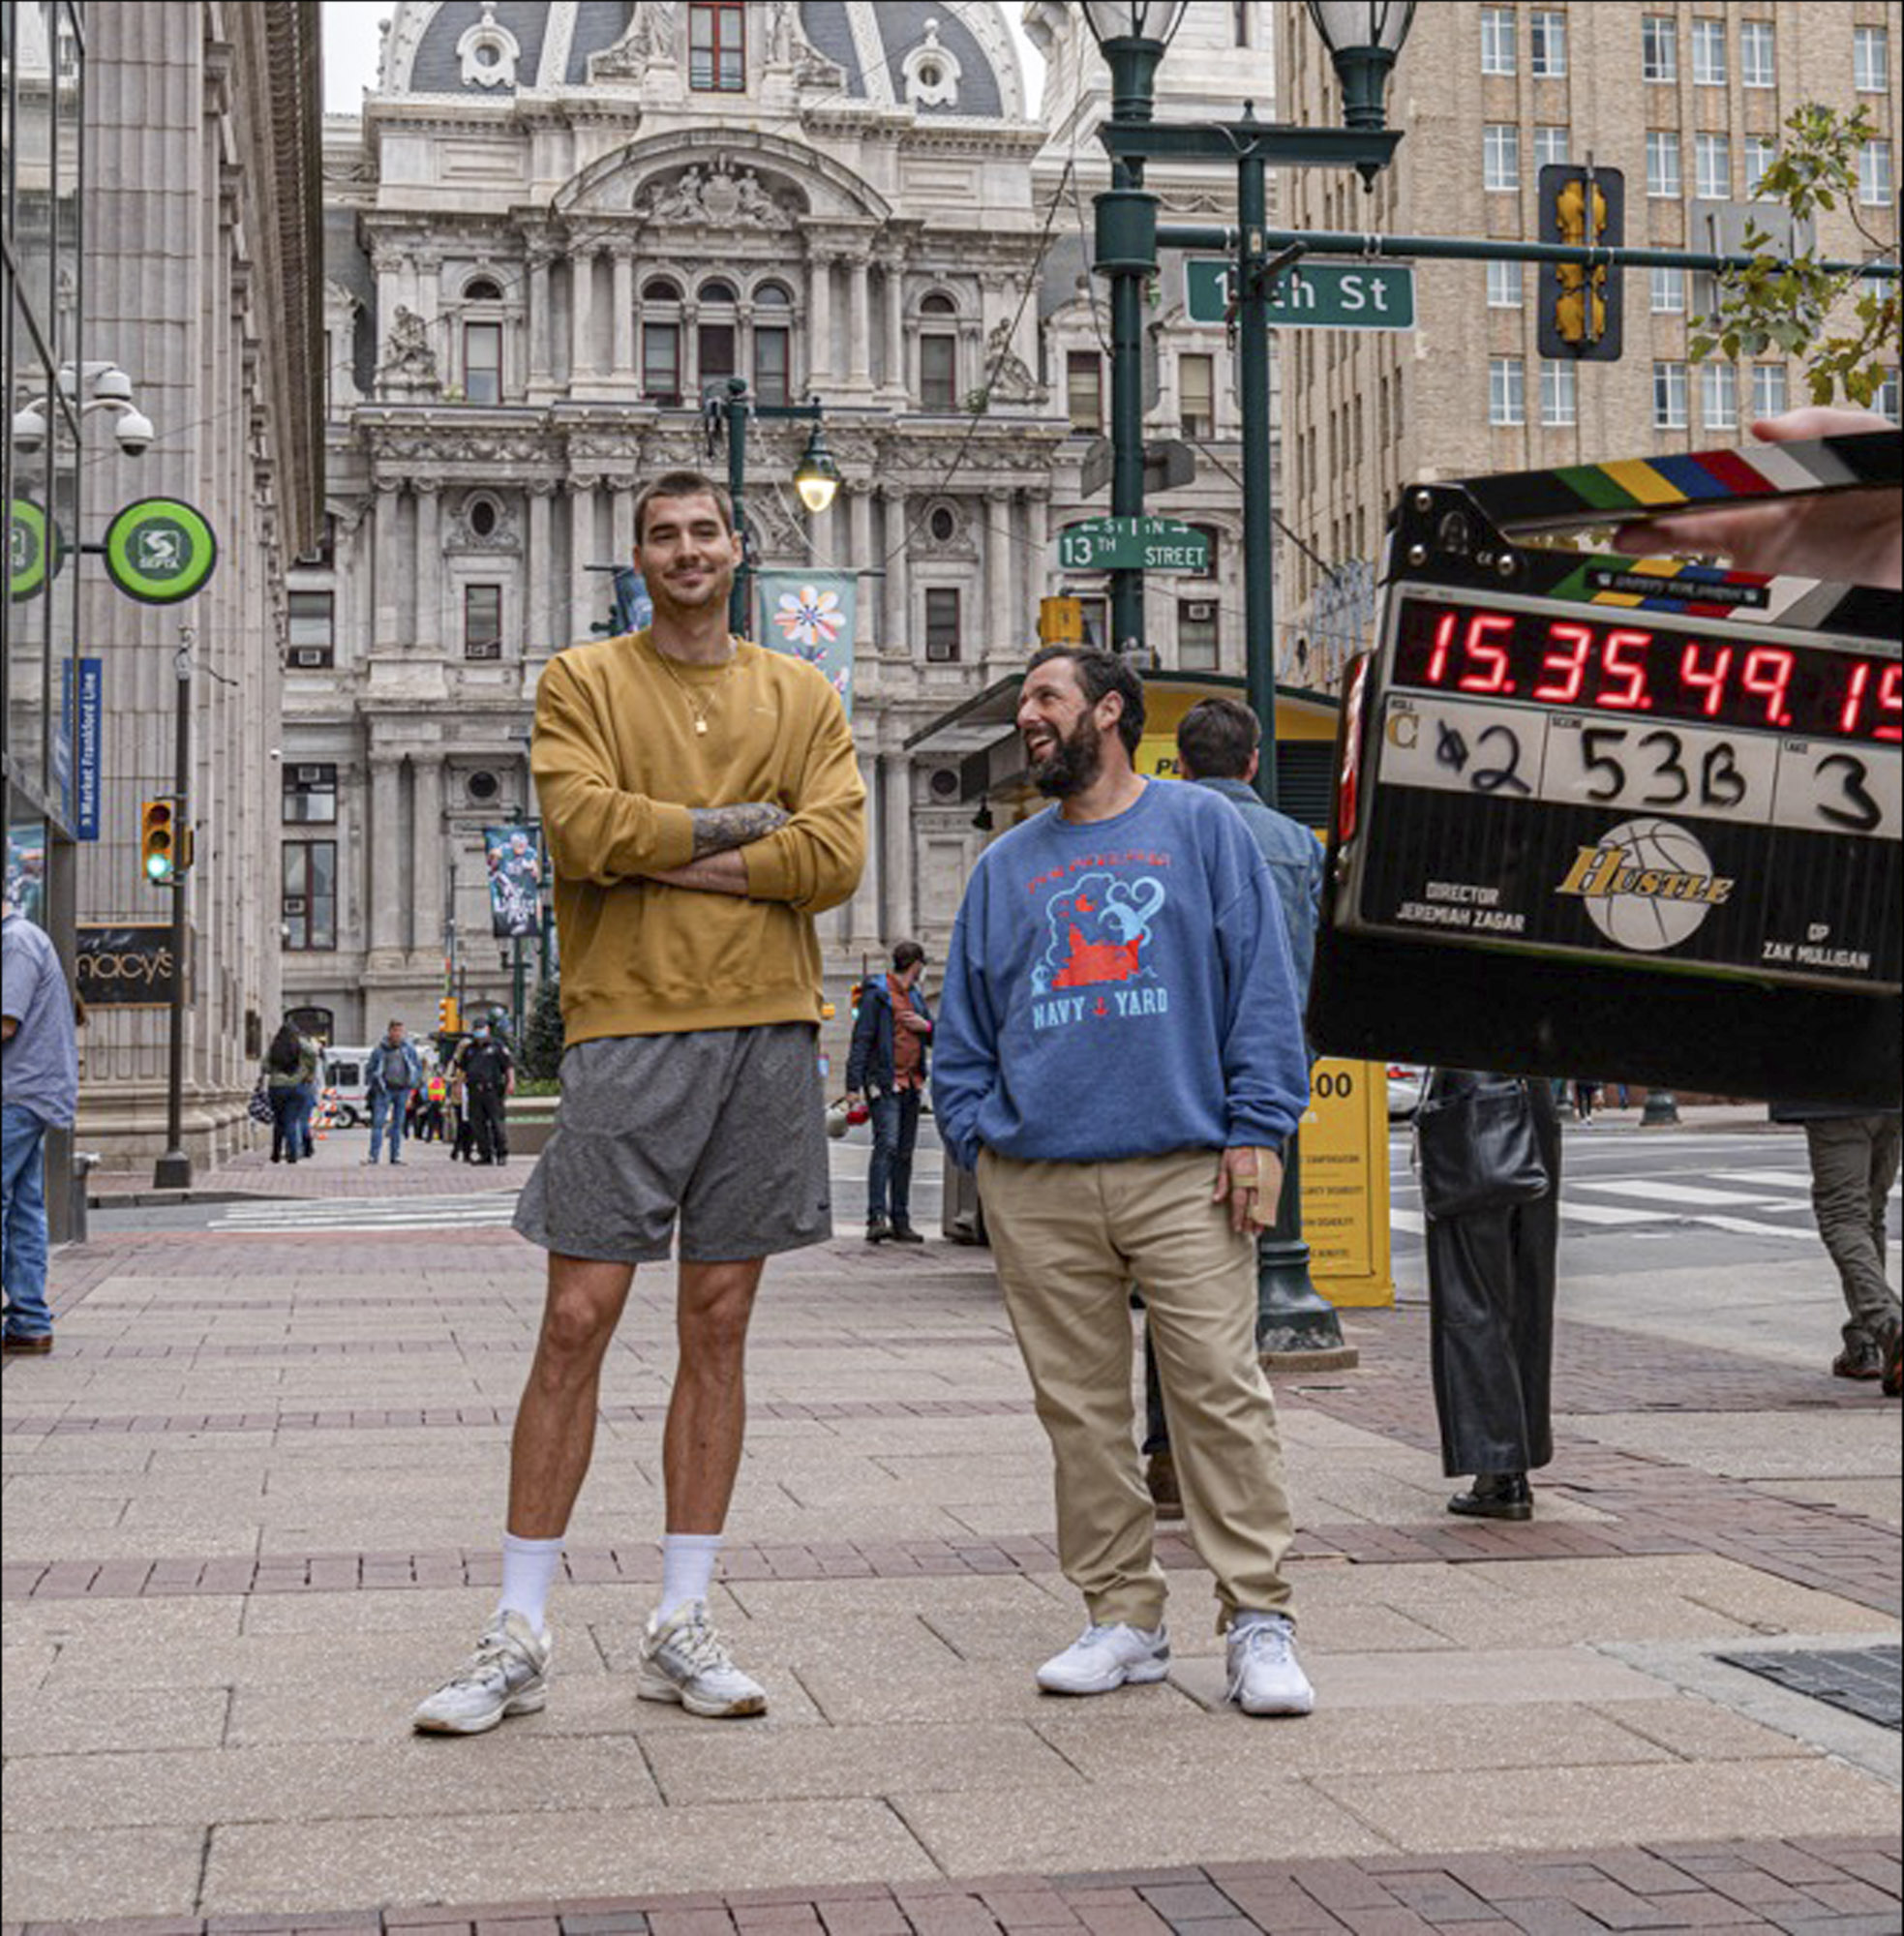 Adam Sandler stars as a washed-up NBA scout in Netflix's Hustle